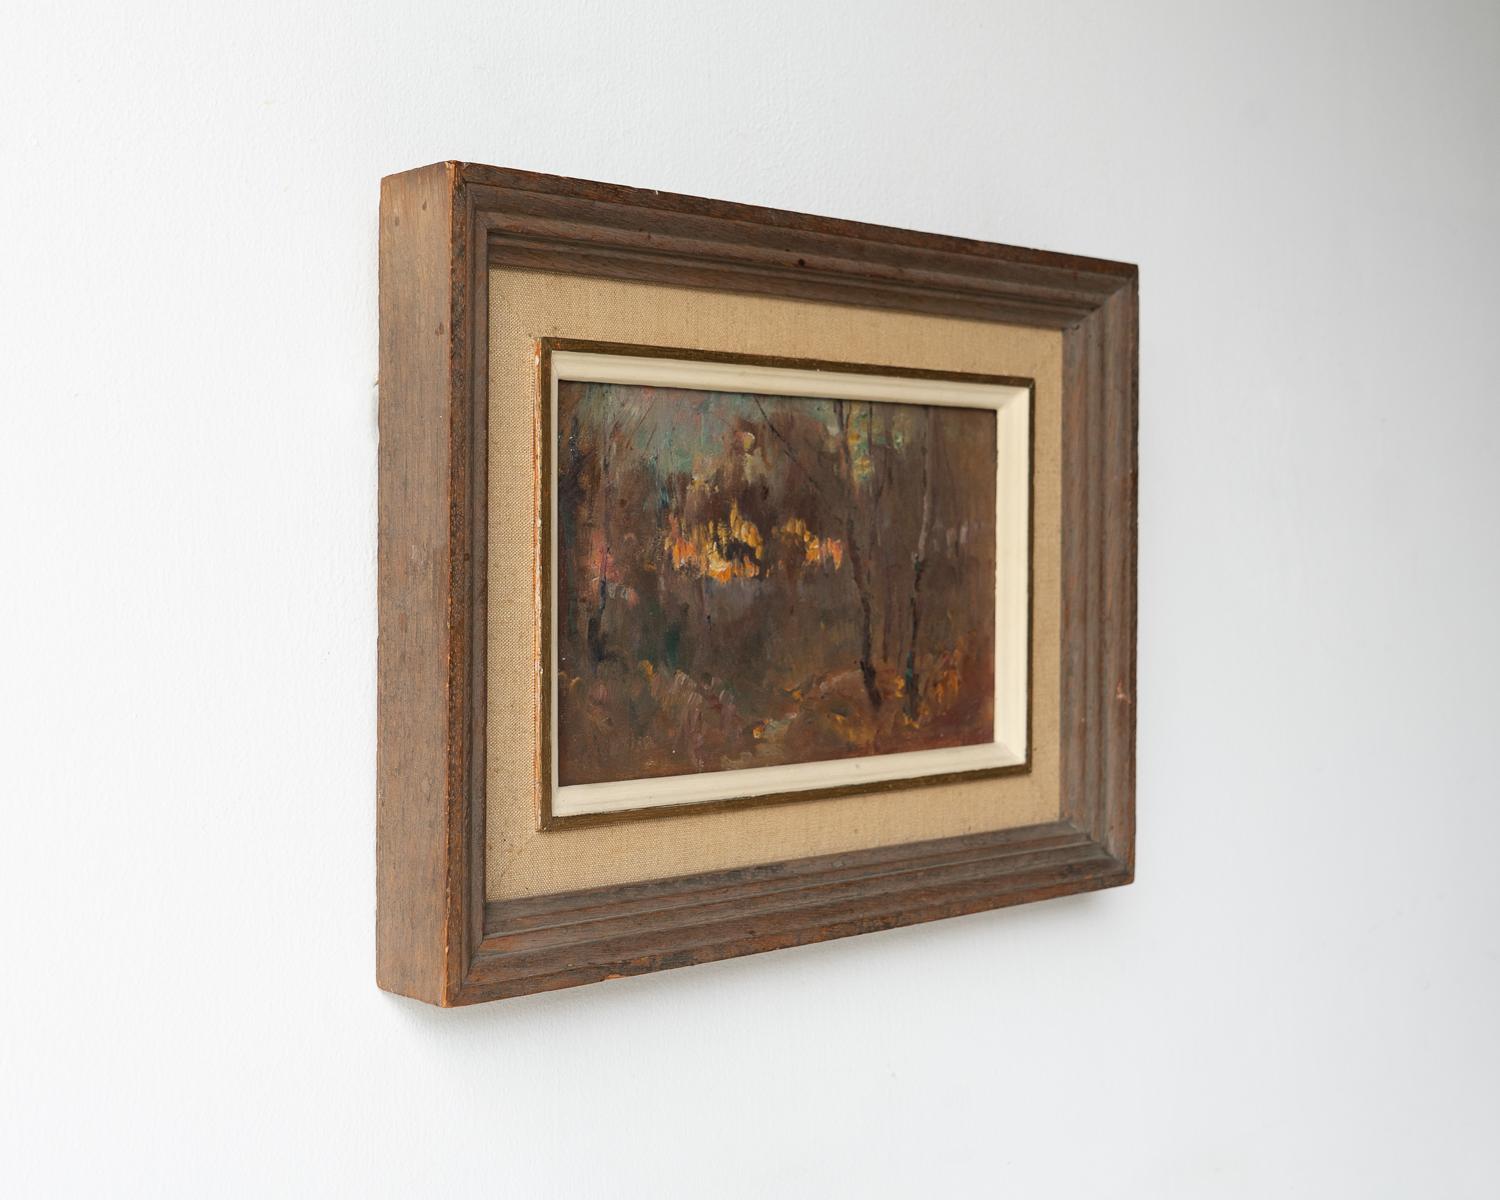 20th Century English Impressionist Landscape By James Herbert Snell, Antique Oil Painting For Sale